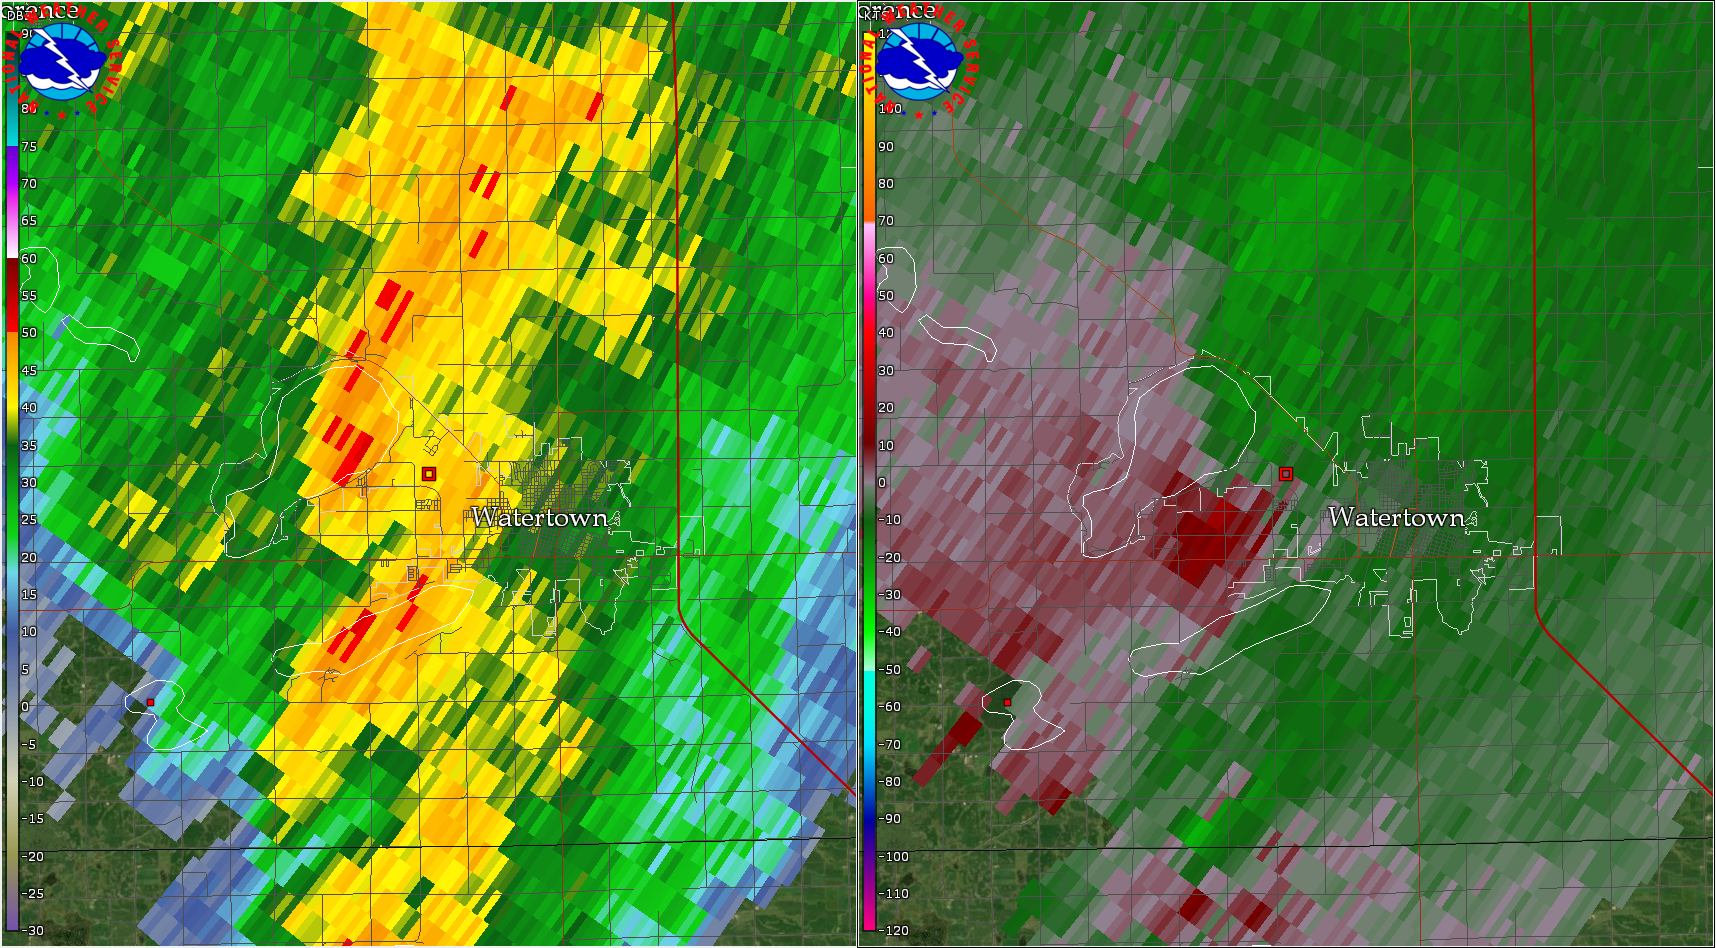 KABR radar imagery at 3:31 PM CDT shortly before the tornado occurred